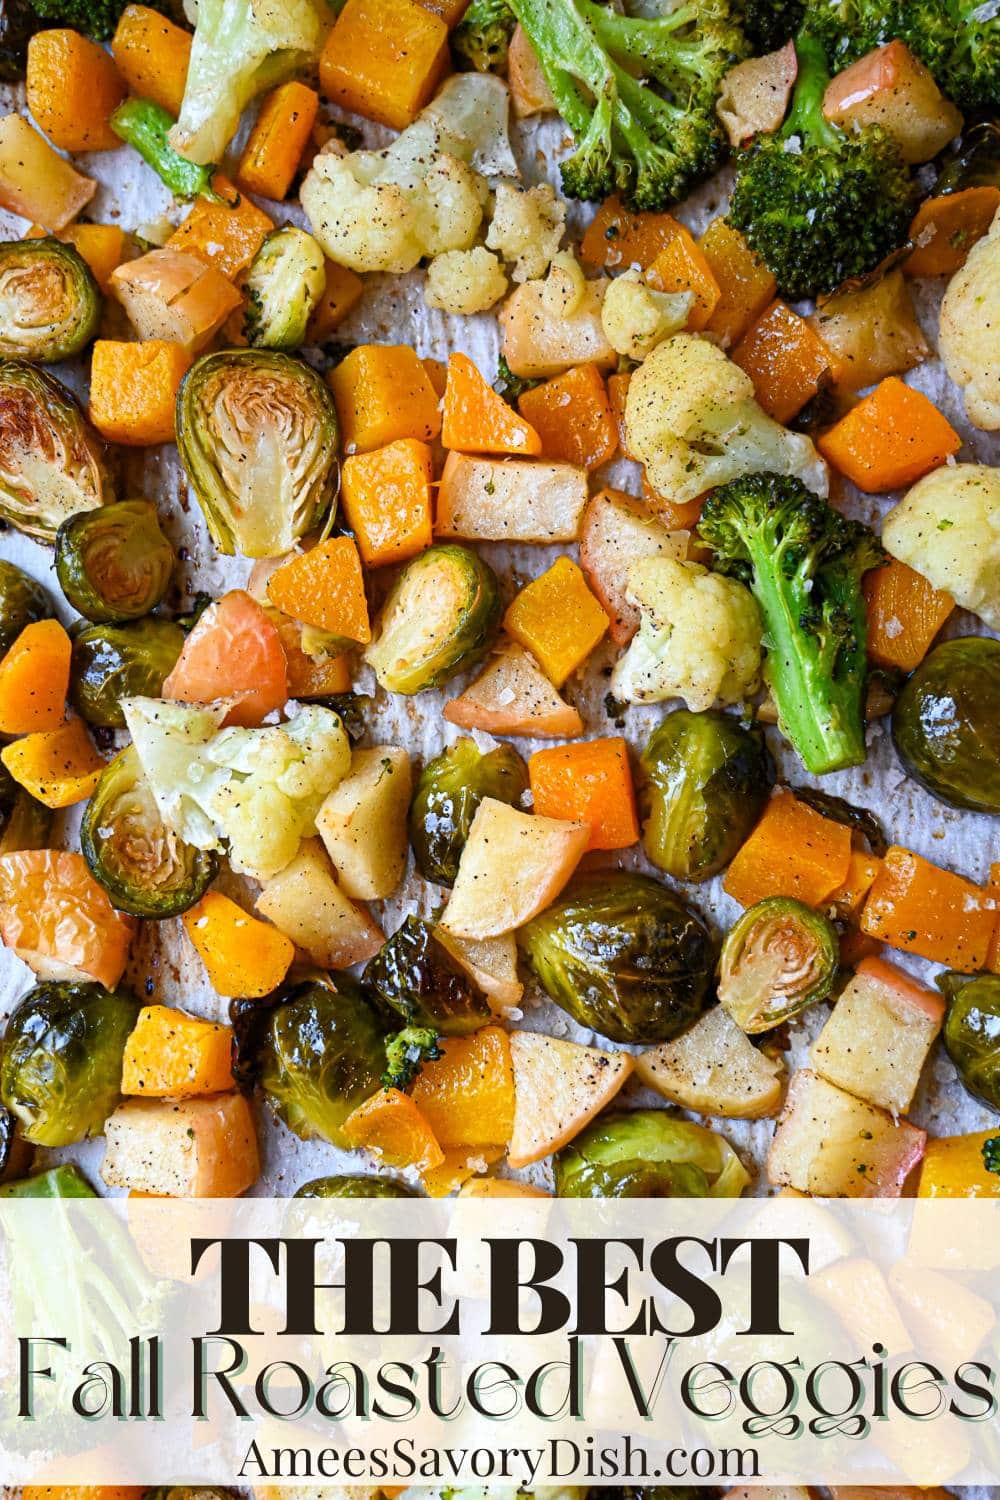 This side dish features butternut squash, Brussels sprouts, broccoli, cauliflower, and apples, creating an amazing sweet and savory blend! via @Ameessavorydish